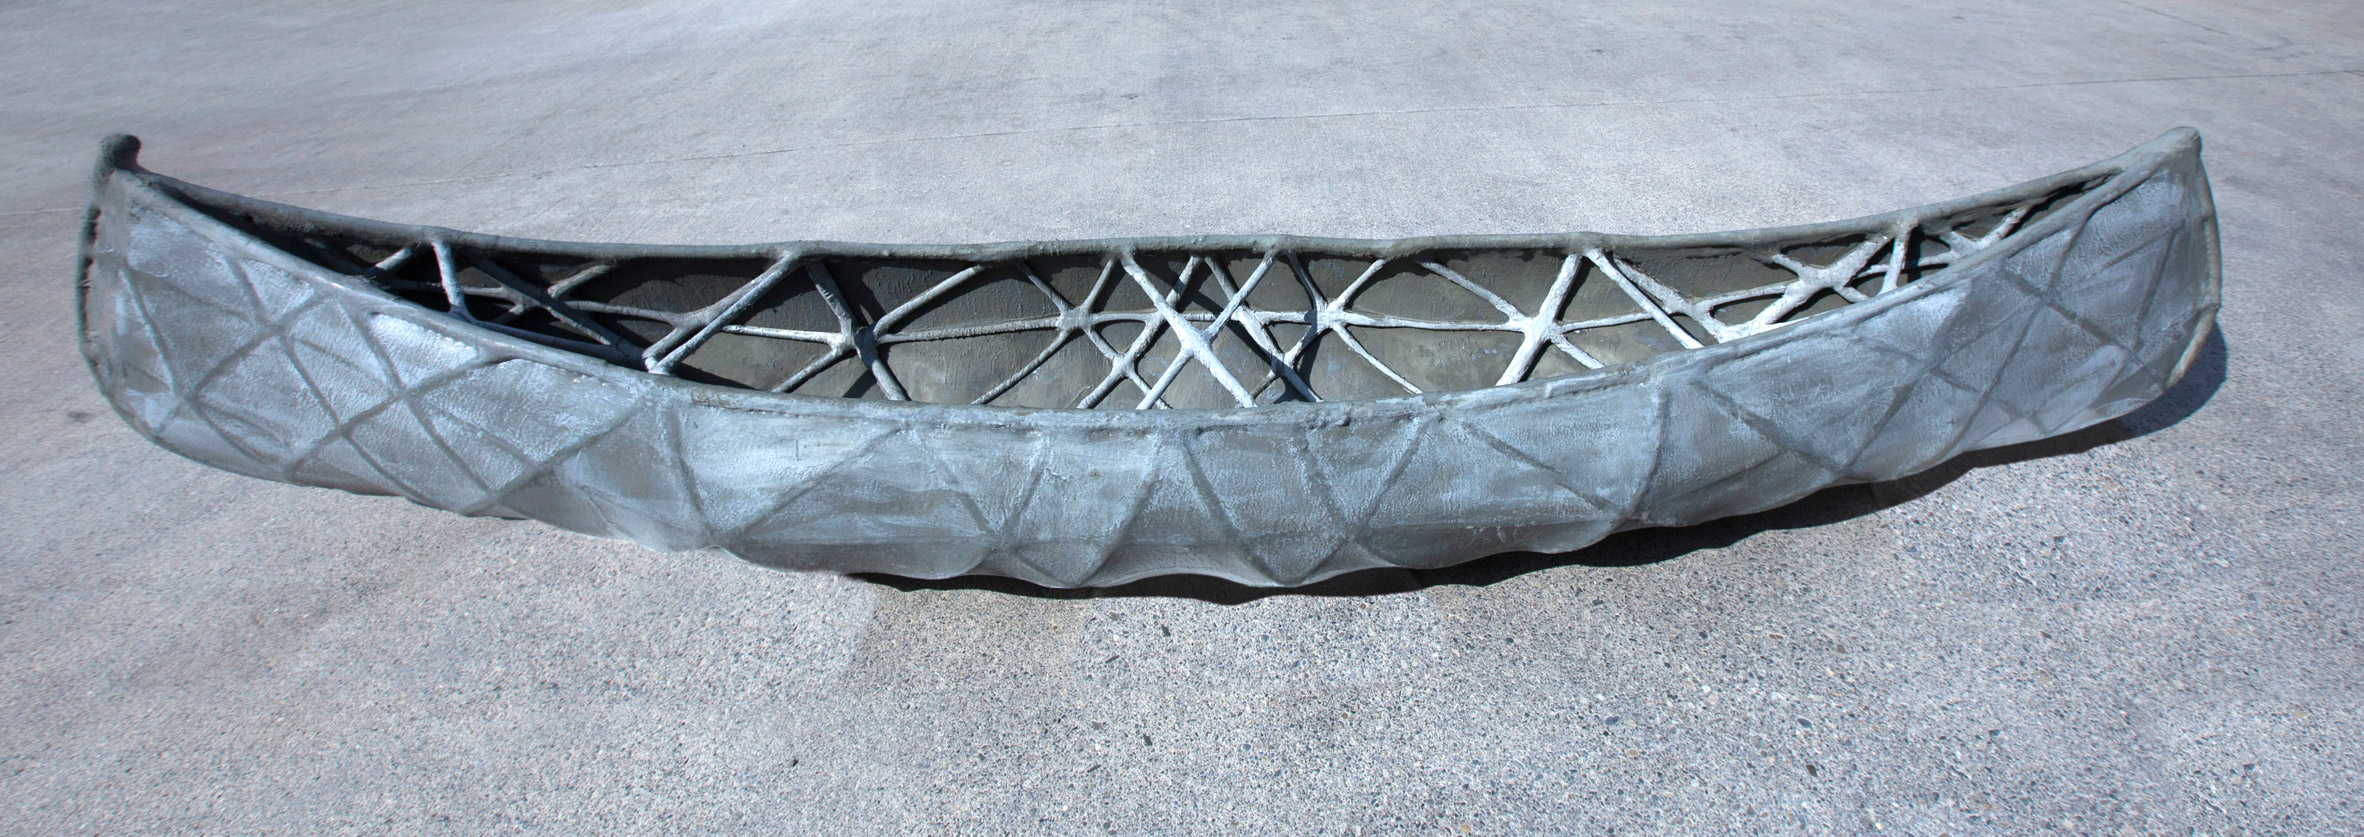 3D printed concrete canoe by ETH Zurich